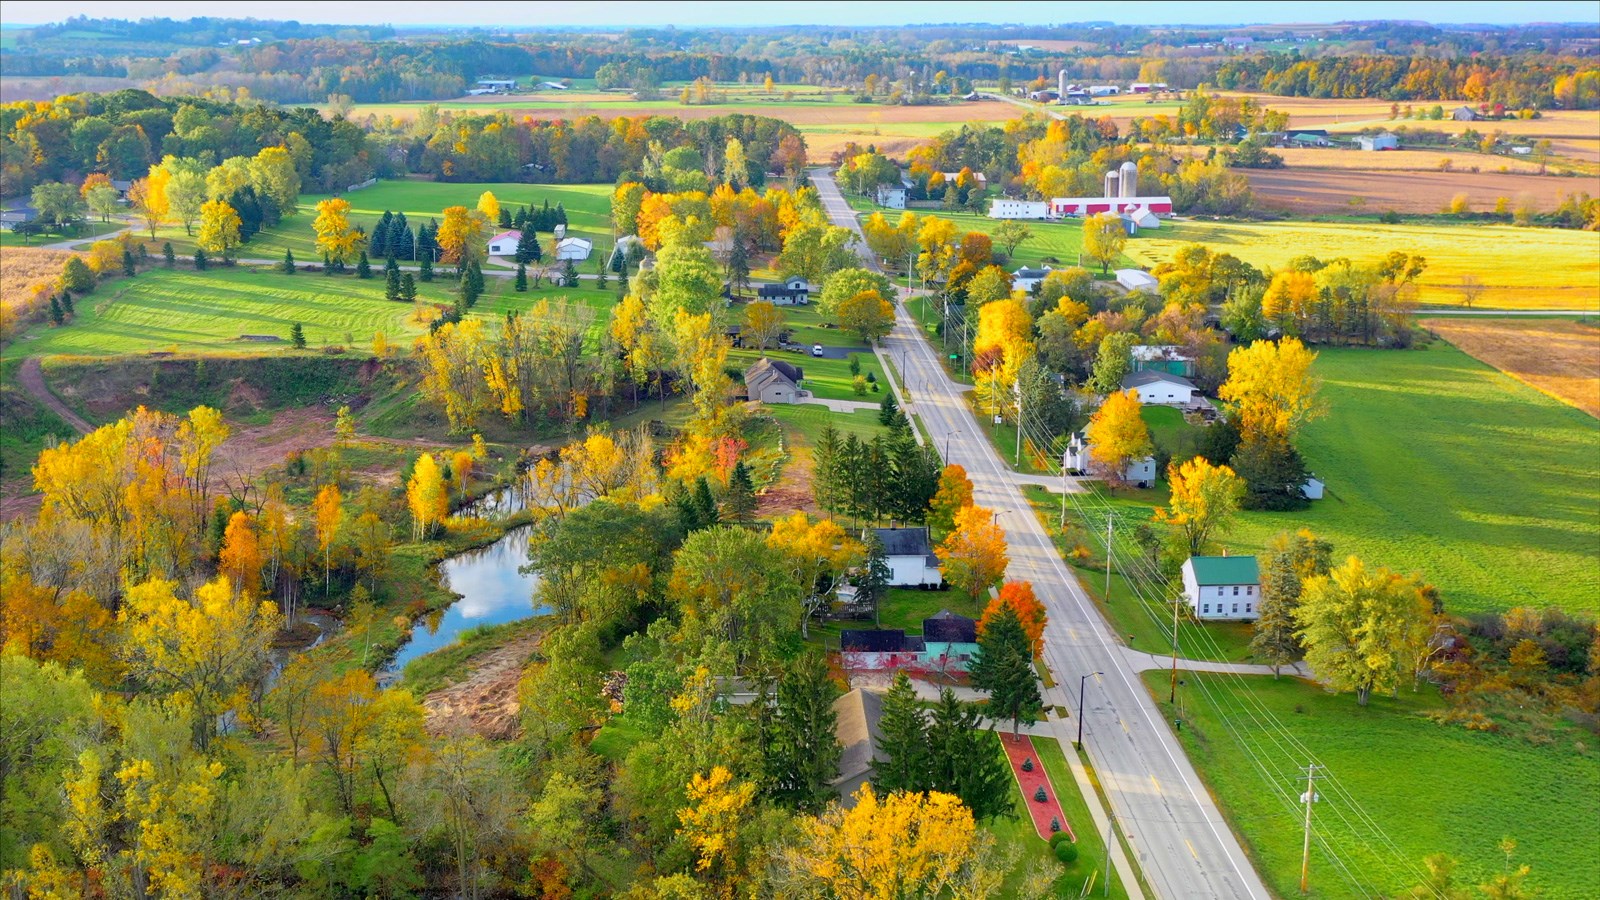 As a WISP entering the fiber broadband market, Uplink, LLC wanted to serve their community and build their network as efficiently as possible in an area that the bigger telecom operators typically overlook: rural, remote, and disinvested for decades.